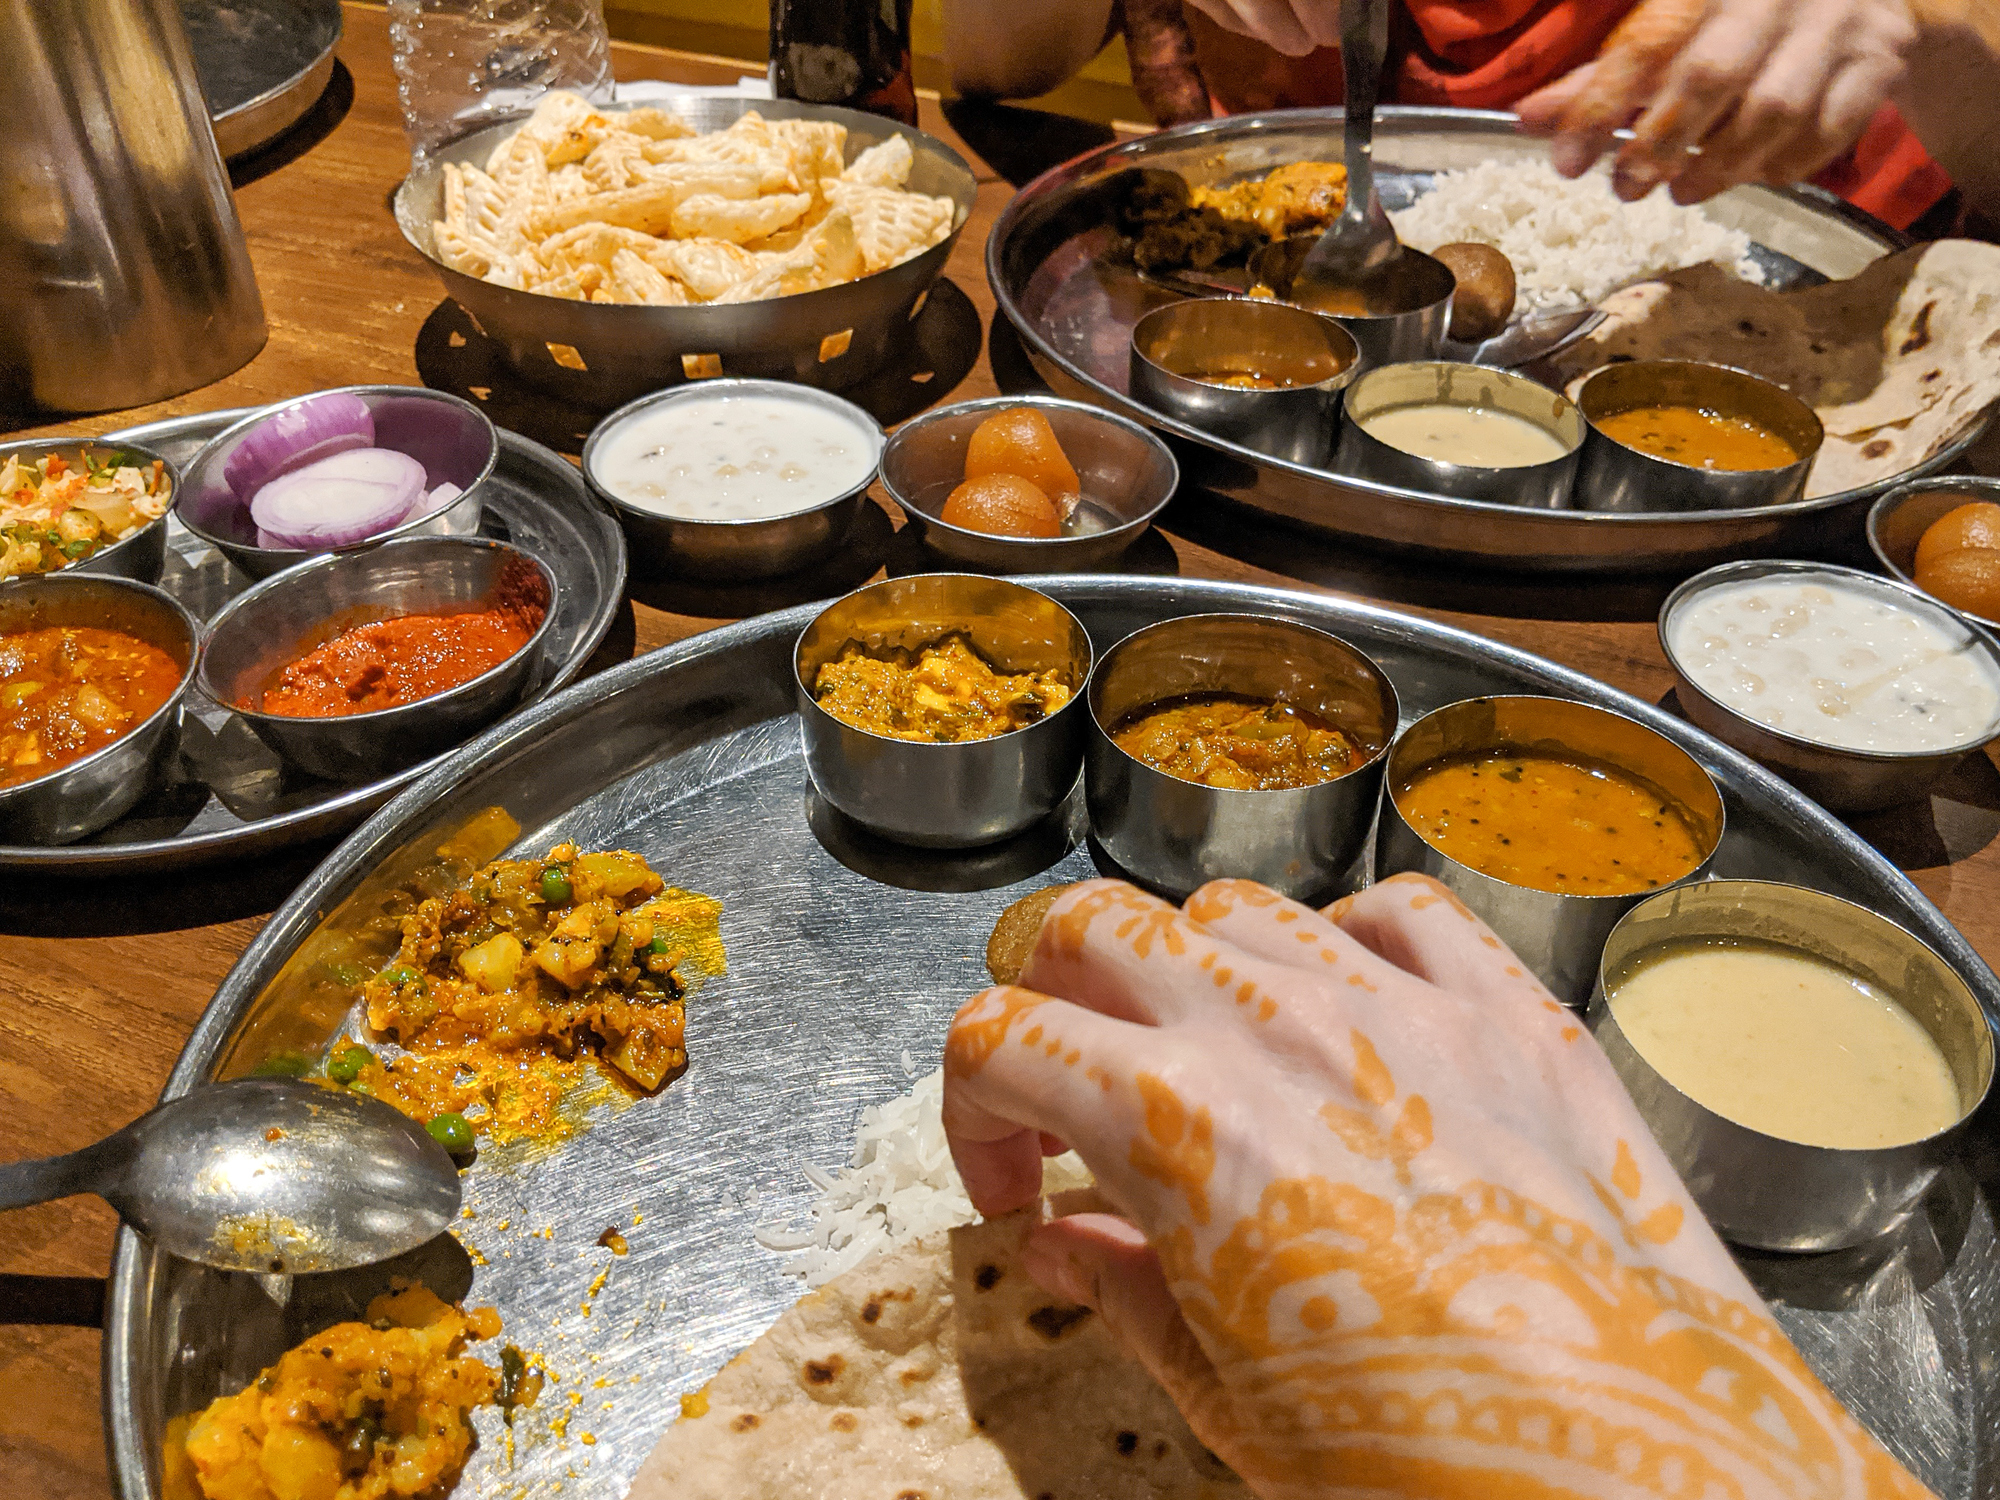 A traditional Indian meal is being enjoyed